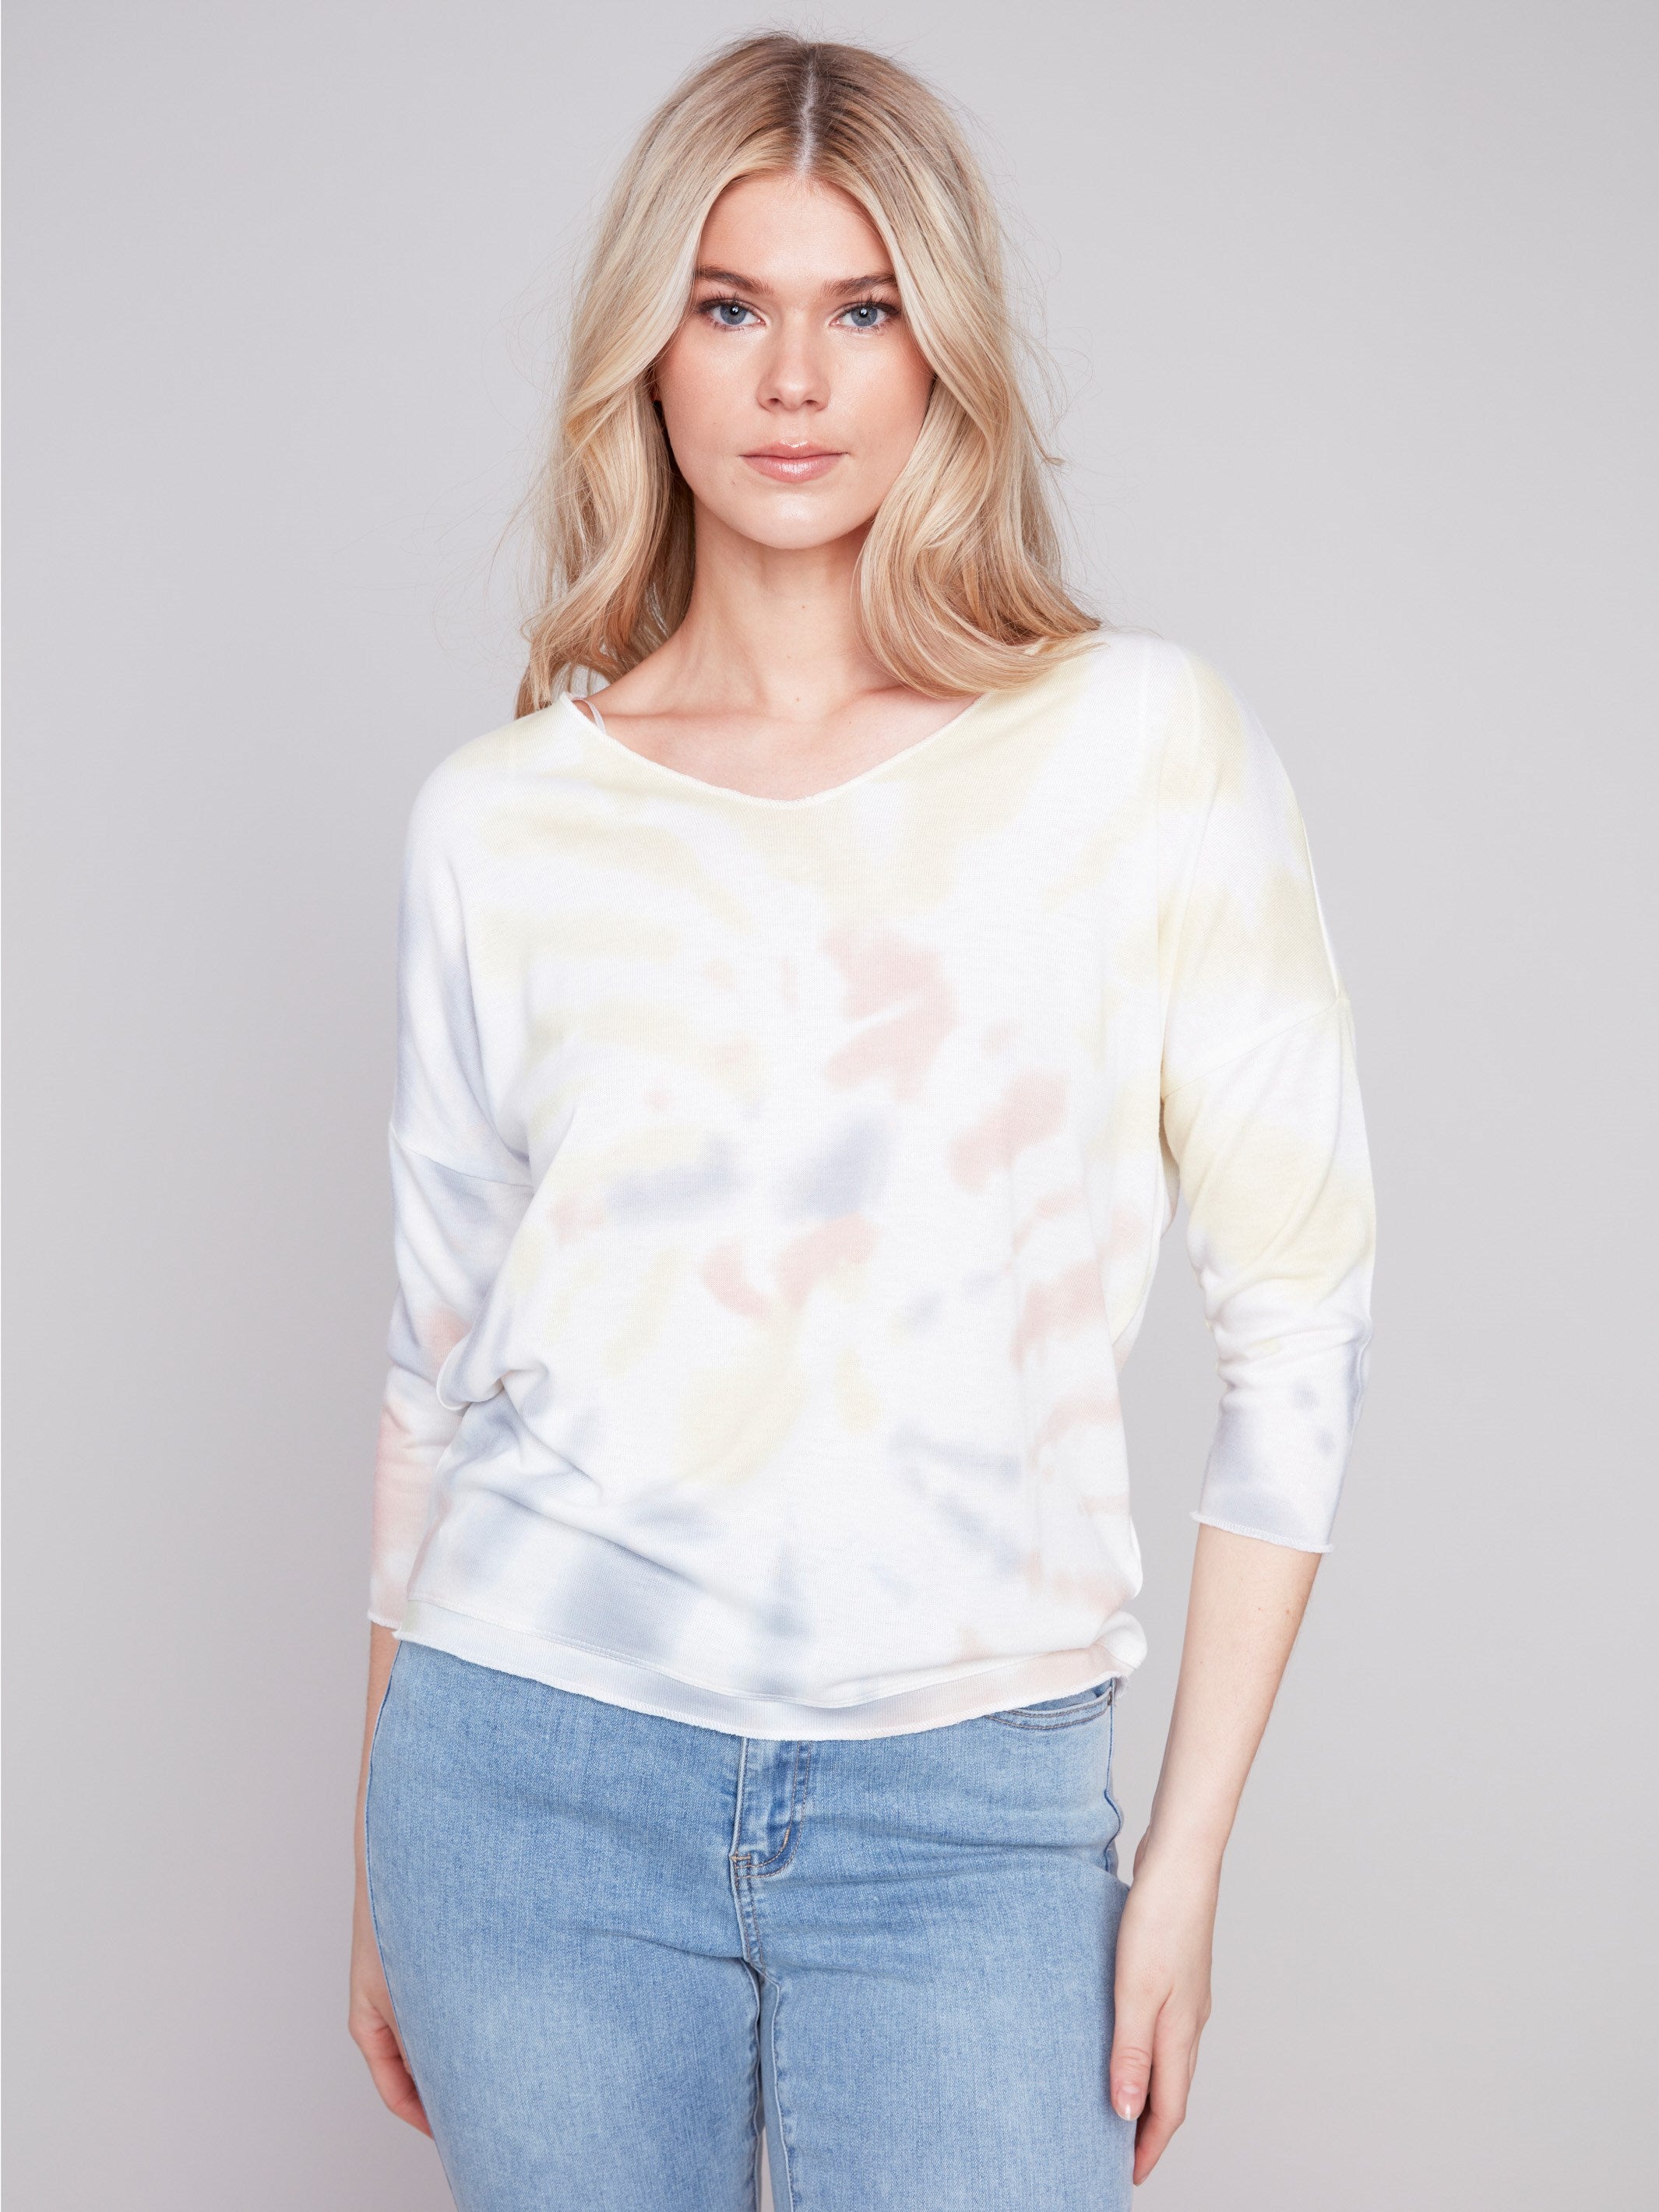 Tie Dye V-Neck Knit Top - Tulip - Charlie B Collection Canada - Image 4